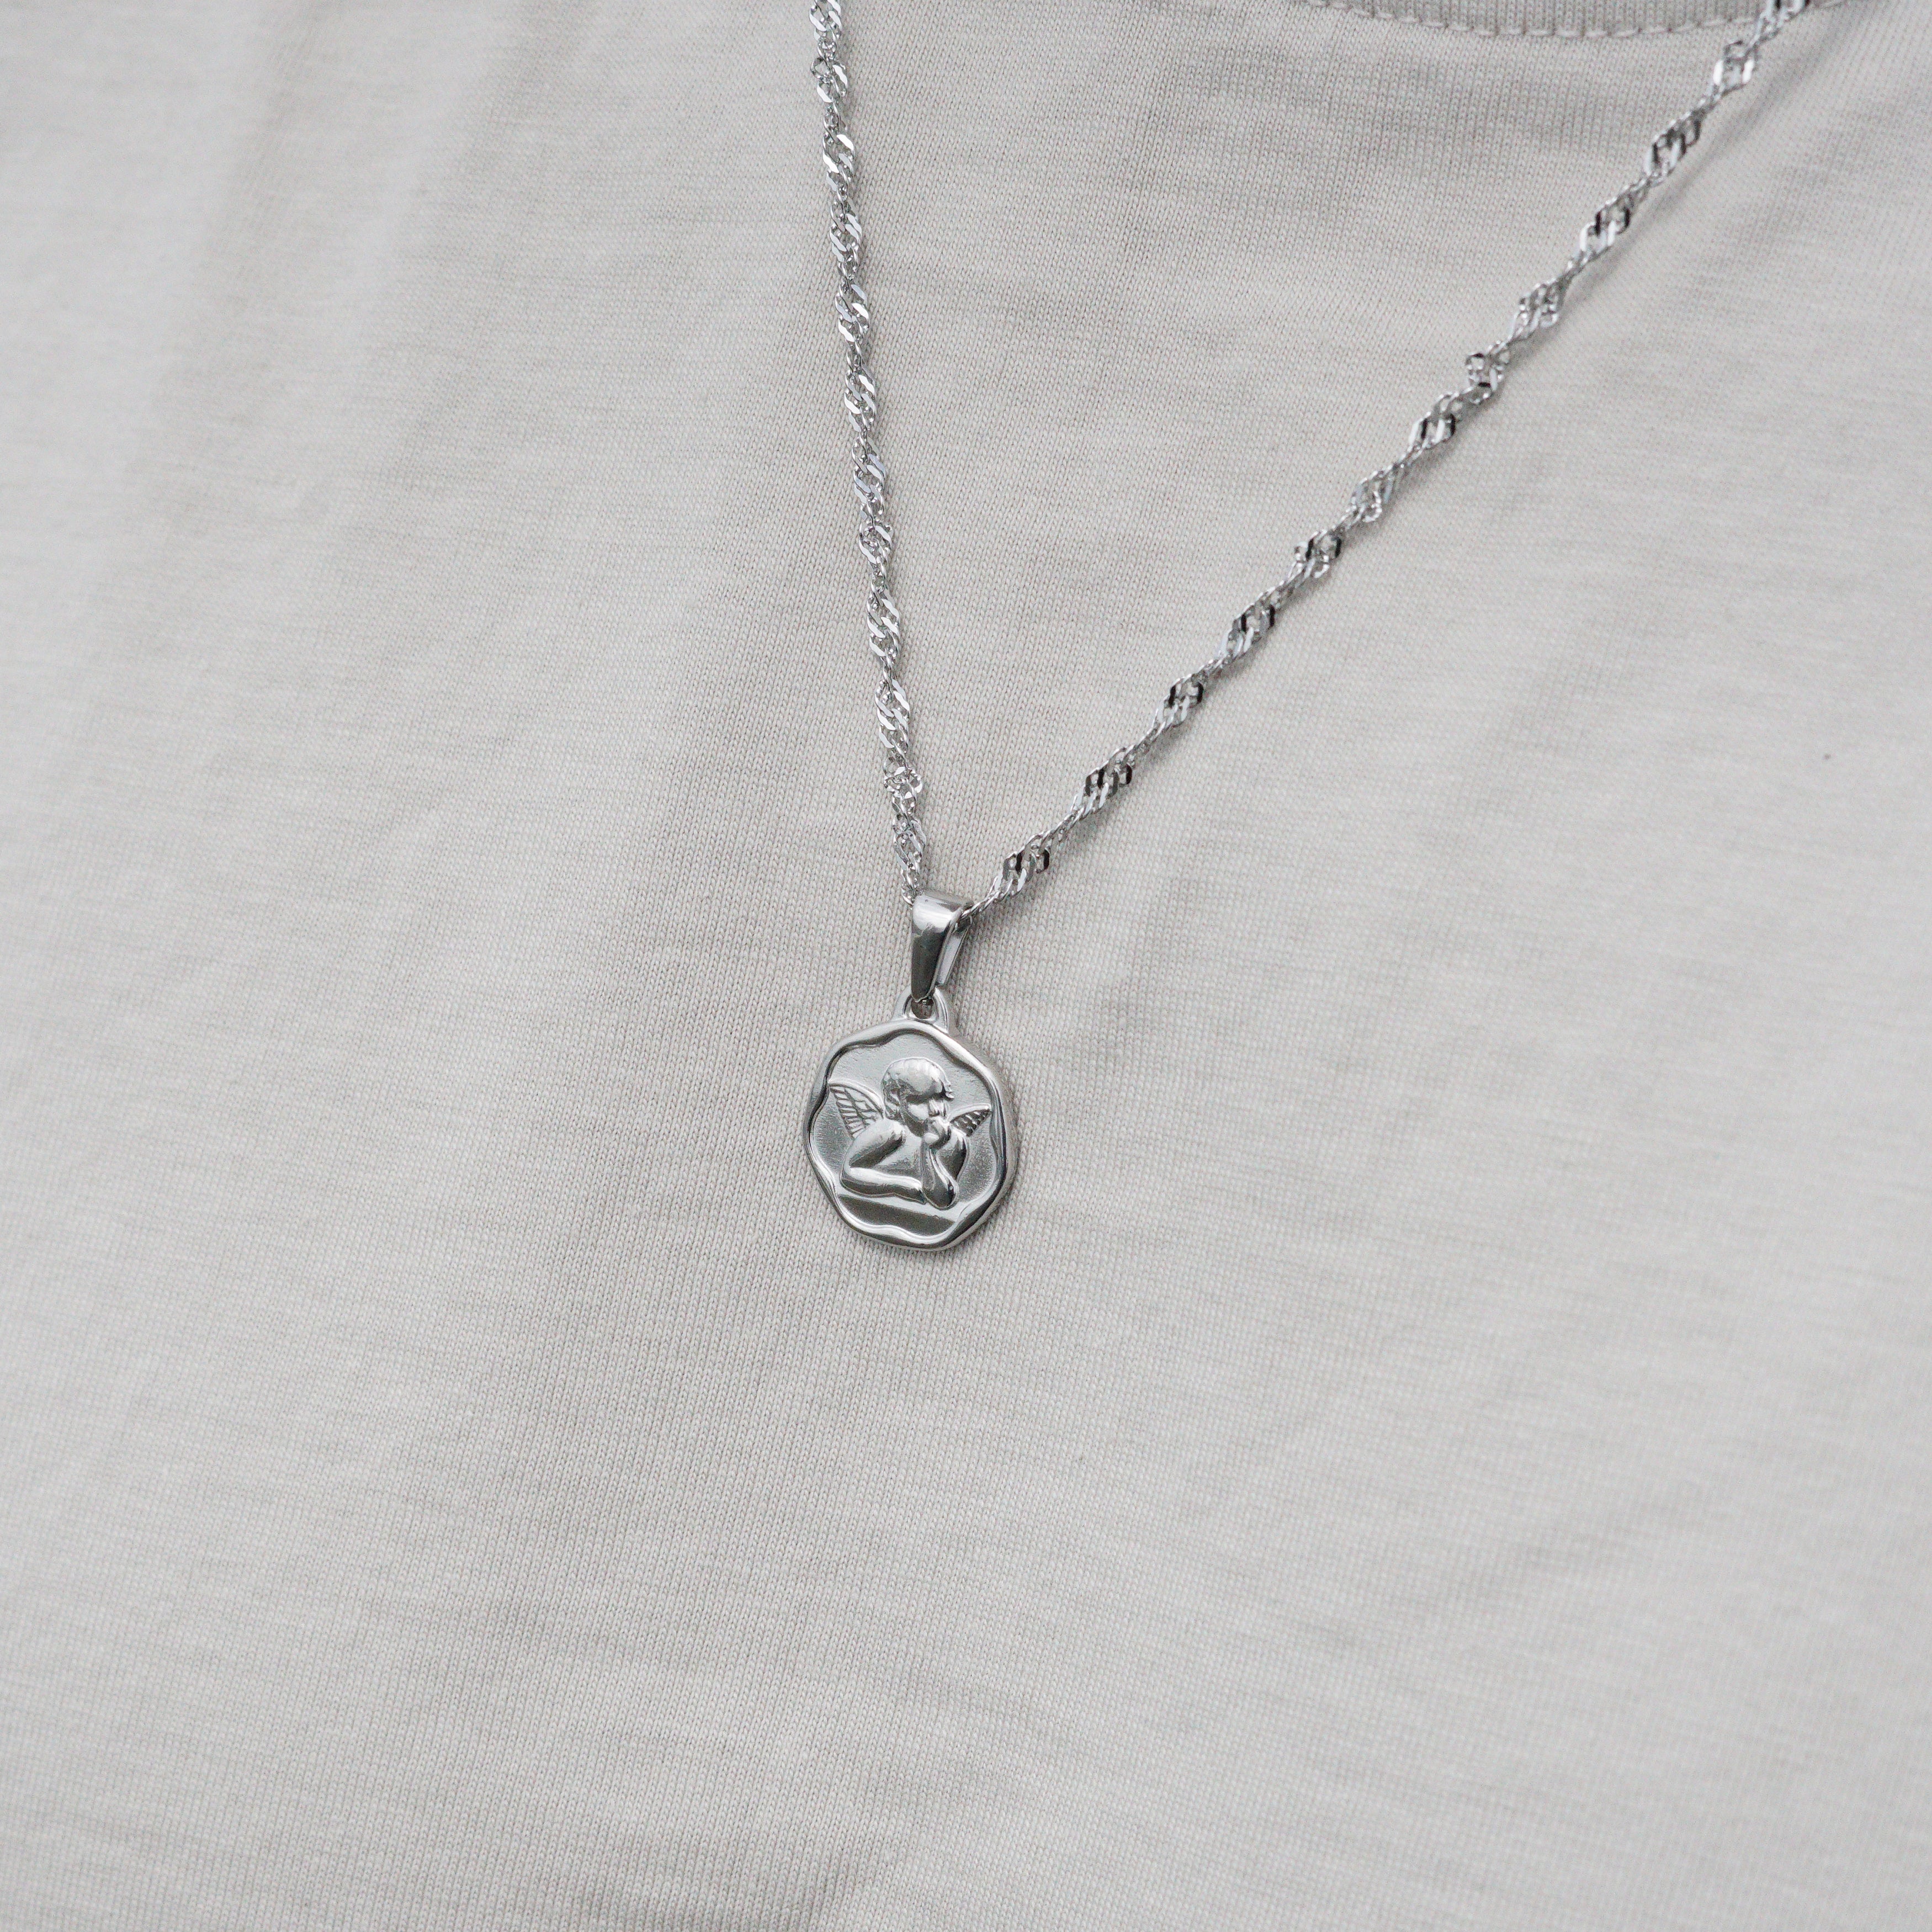 AMOR NECKLACE - SILVER TONE